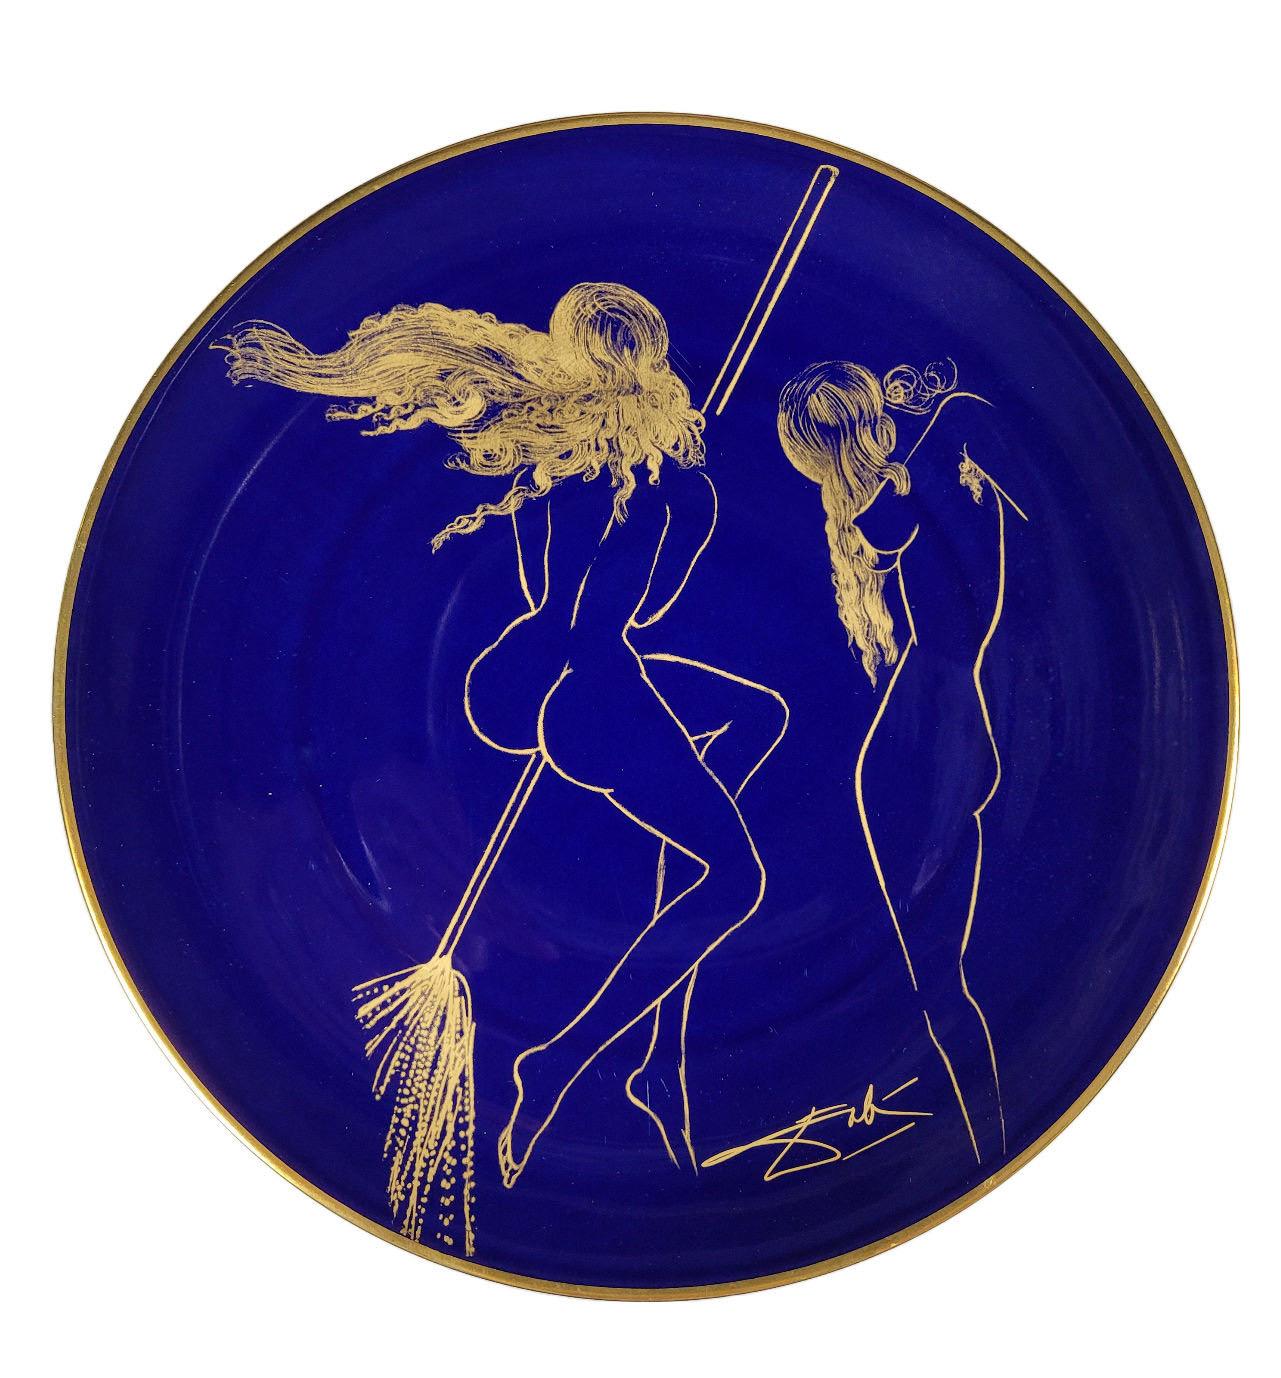 (after) Salvador Dali Figurative Sculpture - “Witches with Broom” exclusive Dali and Raynaud & Co. ltd. Ed. porcelain plate